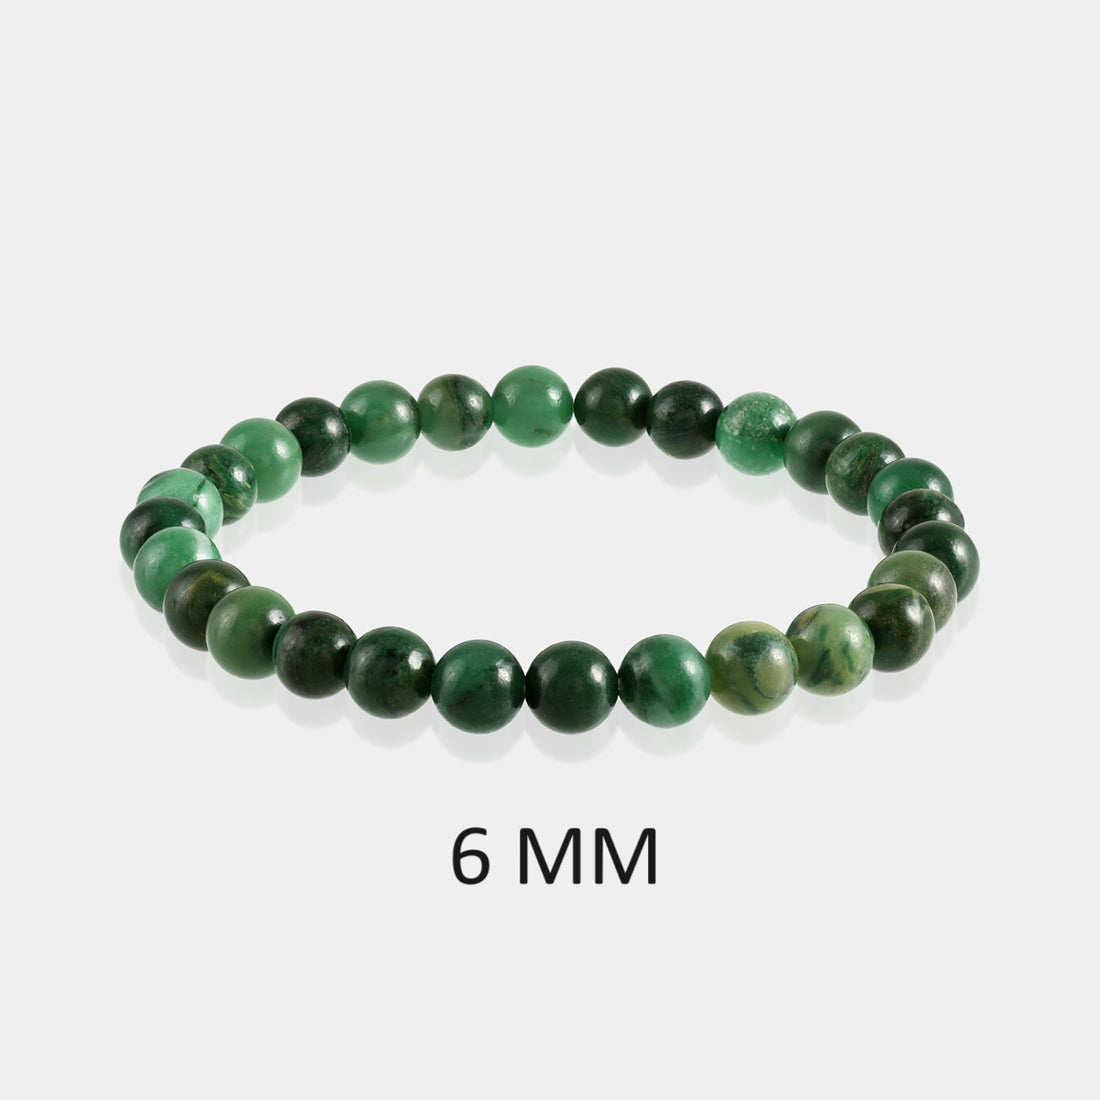 Visual representation of harmony and prosperity associated with the Jade Stretch Bracelet, radiating positive energy and abundance